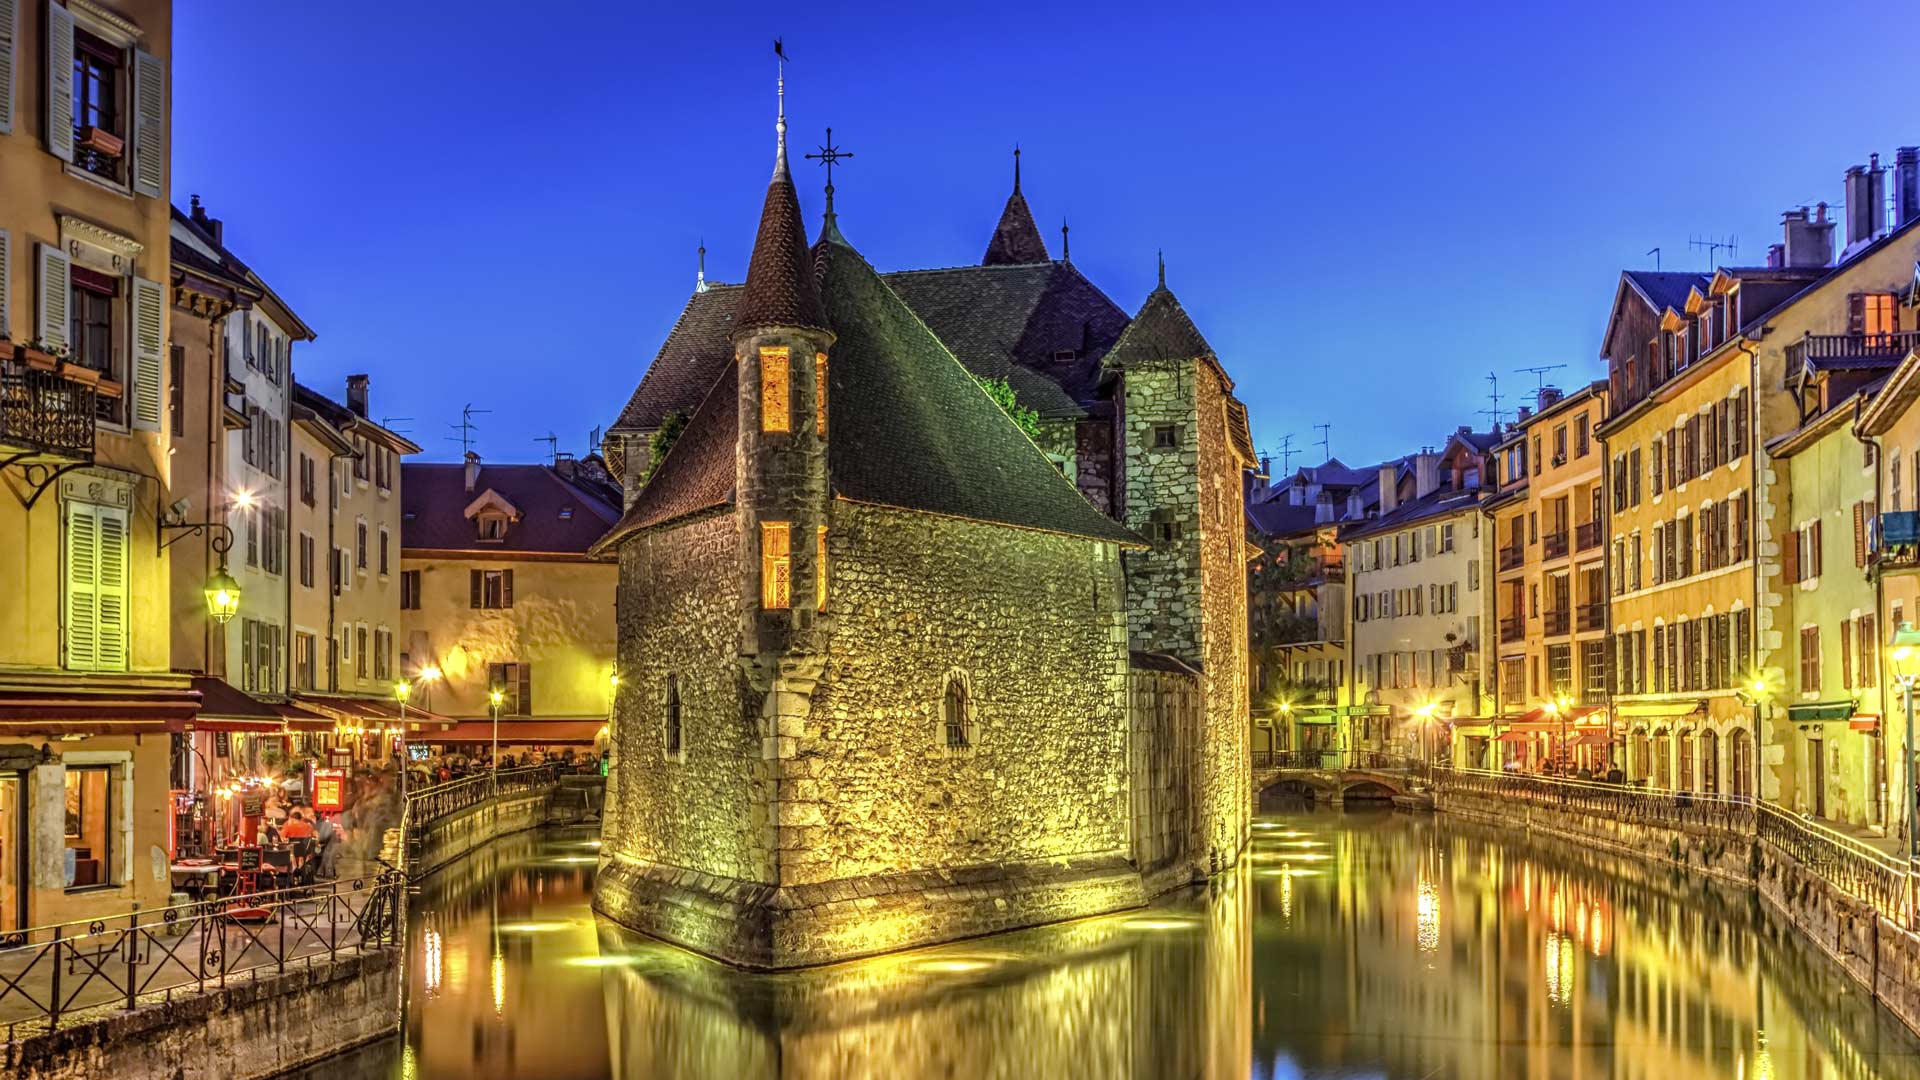 Palais de l'Ile jail and canal in Annecy old city, France, HDR